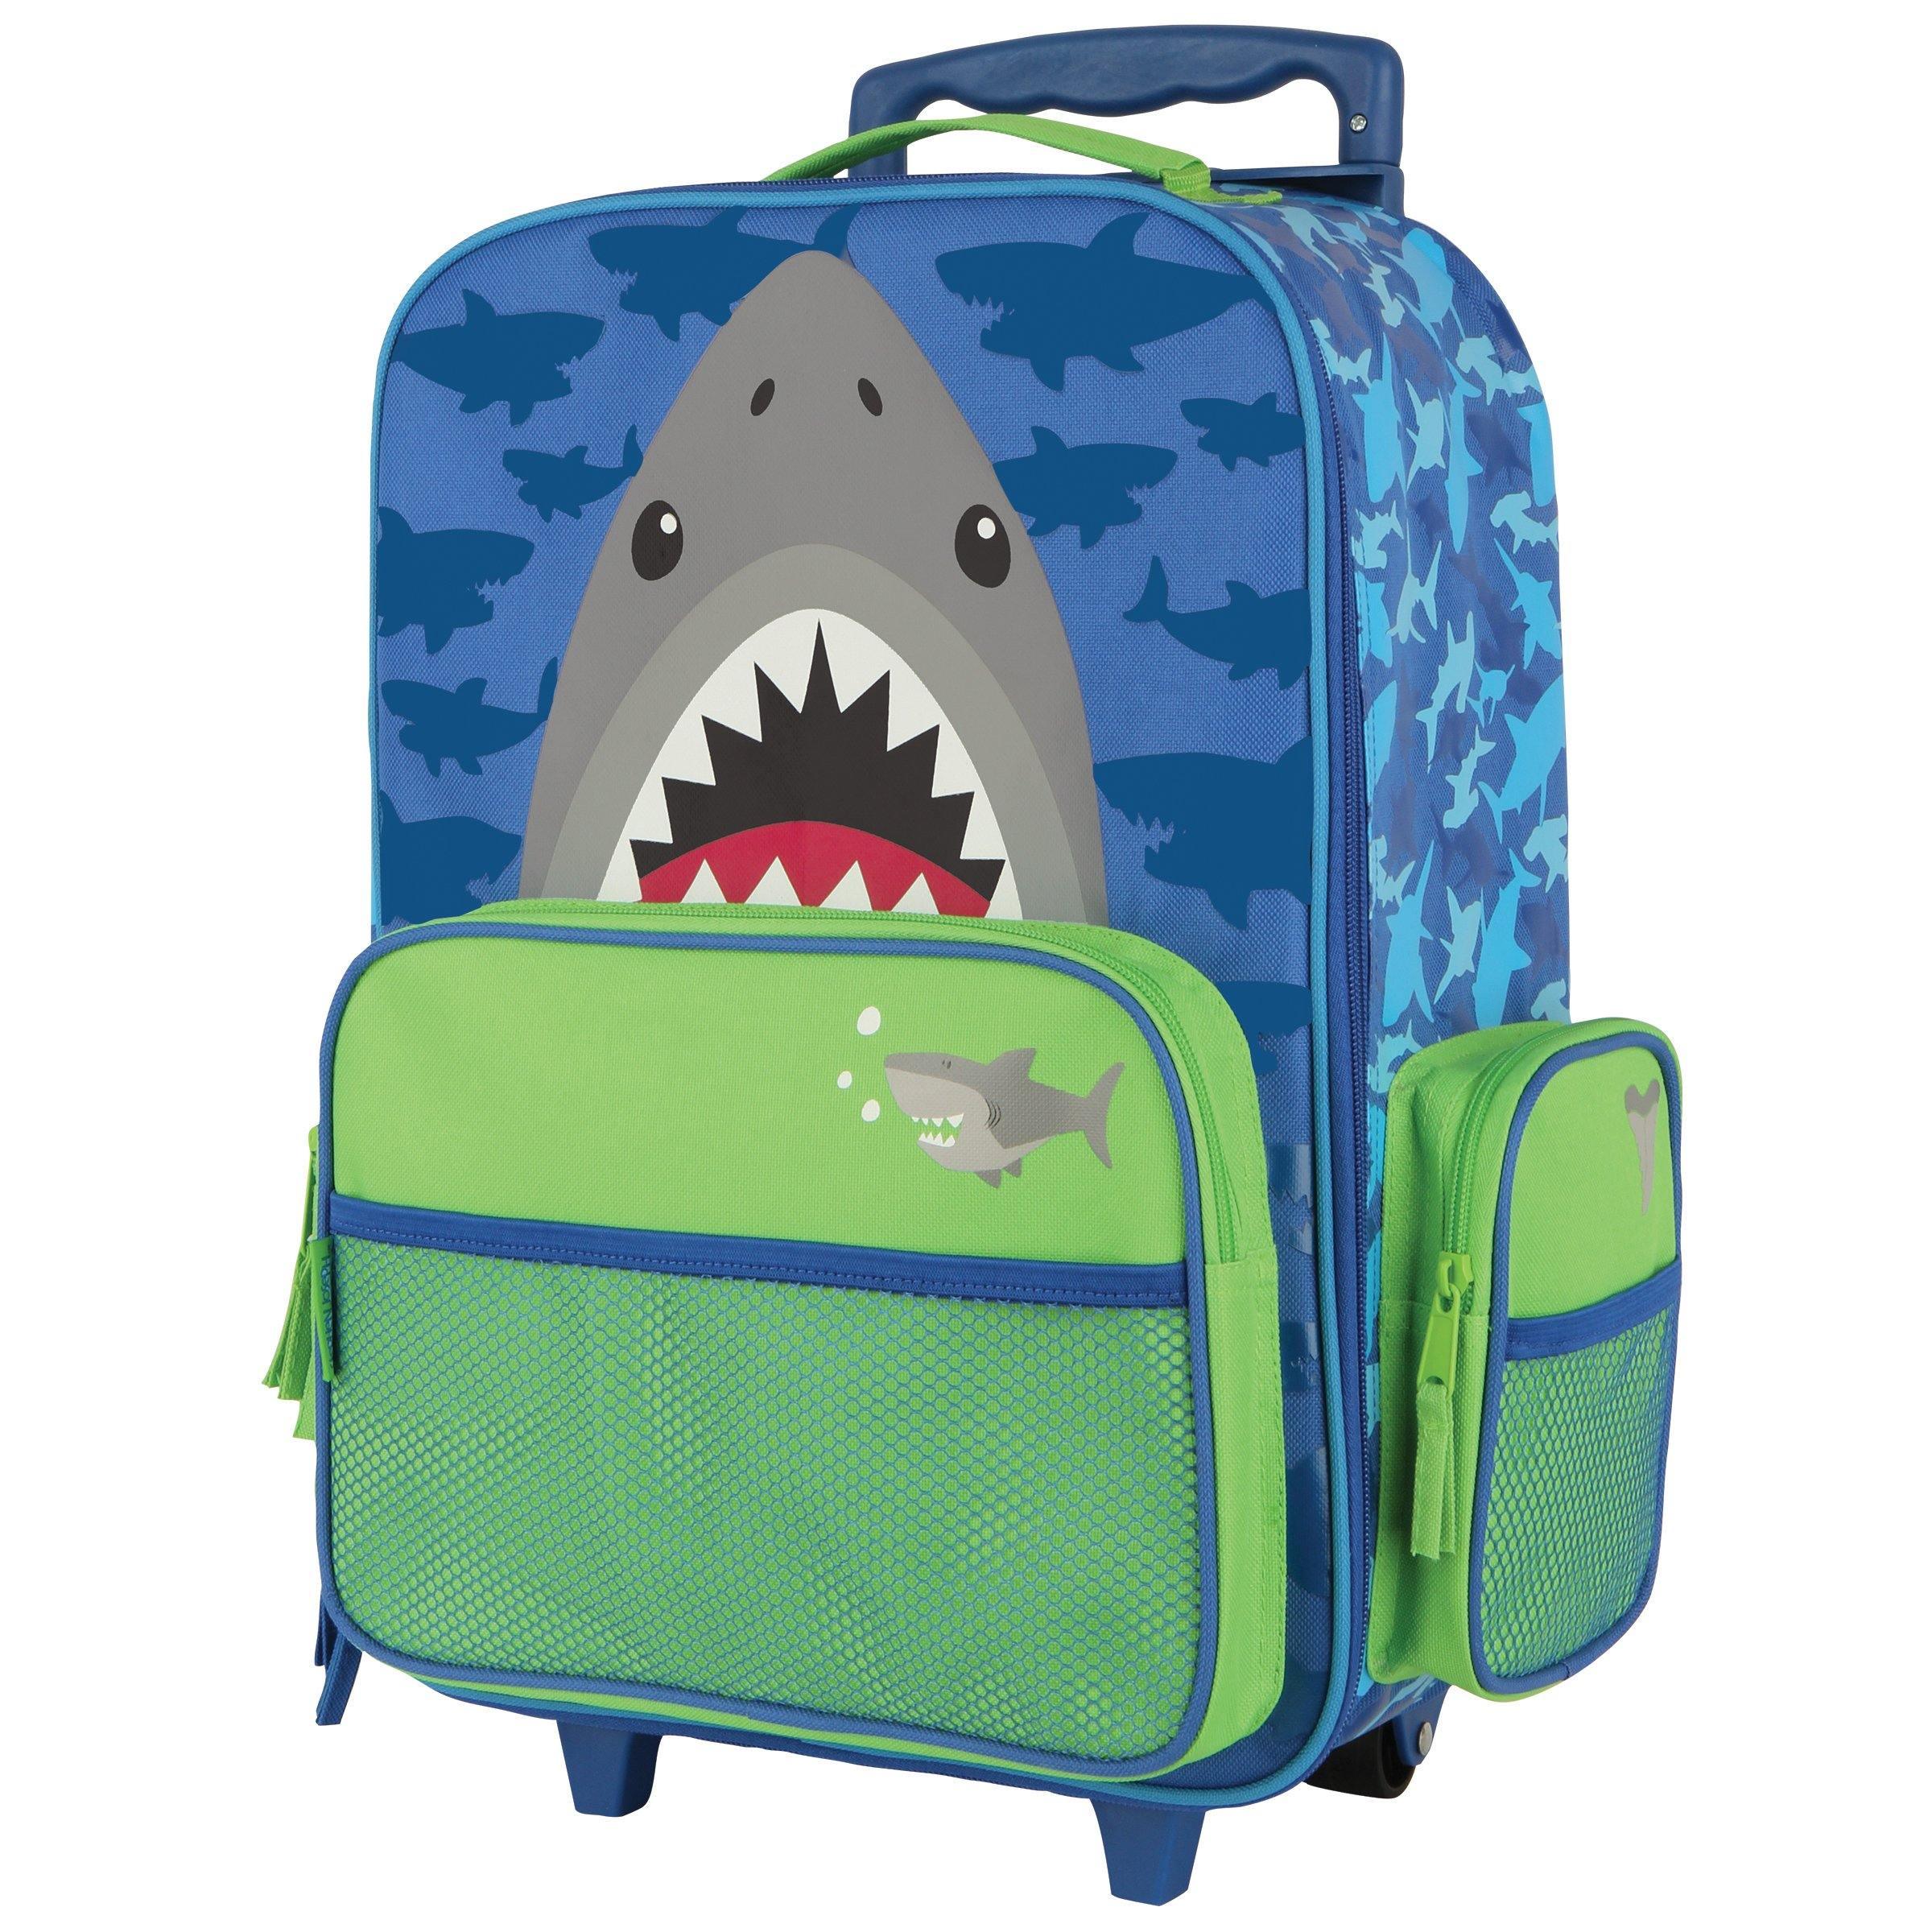 Stephen Joseph Classic Rolling Luggage 18 inch Shark - BumbleToys - 5-7 Years, Backpack, Boys, Cecil, Pre-Order, School Supplies